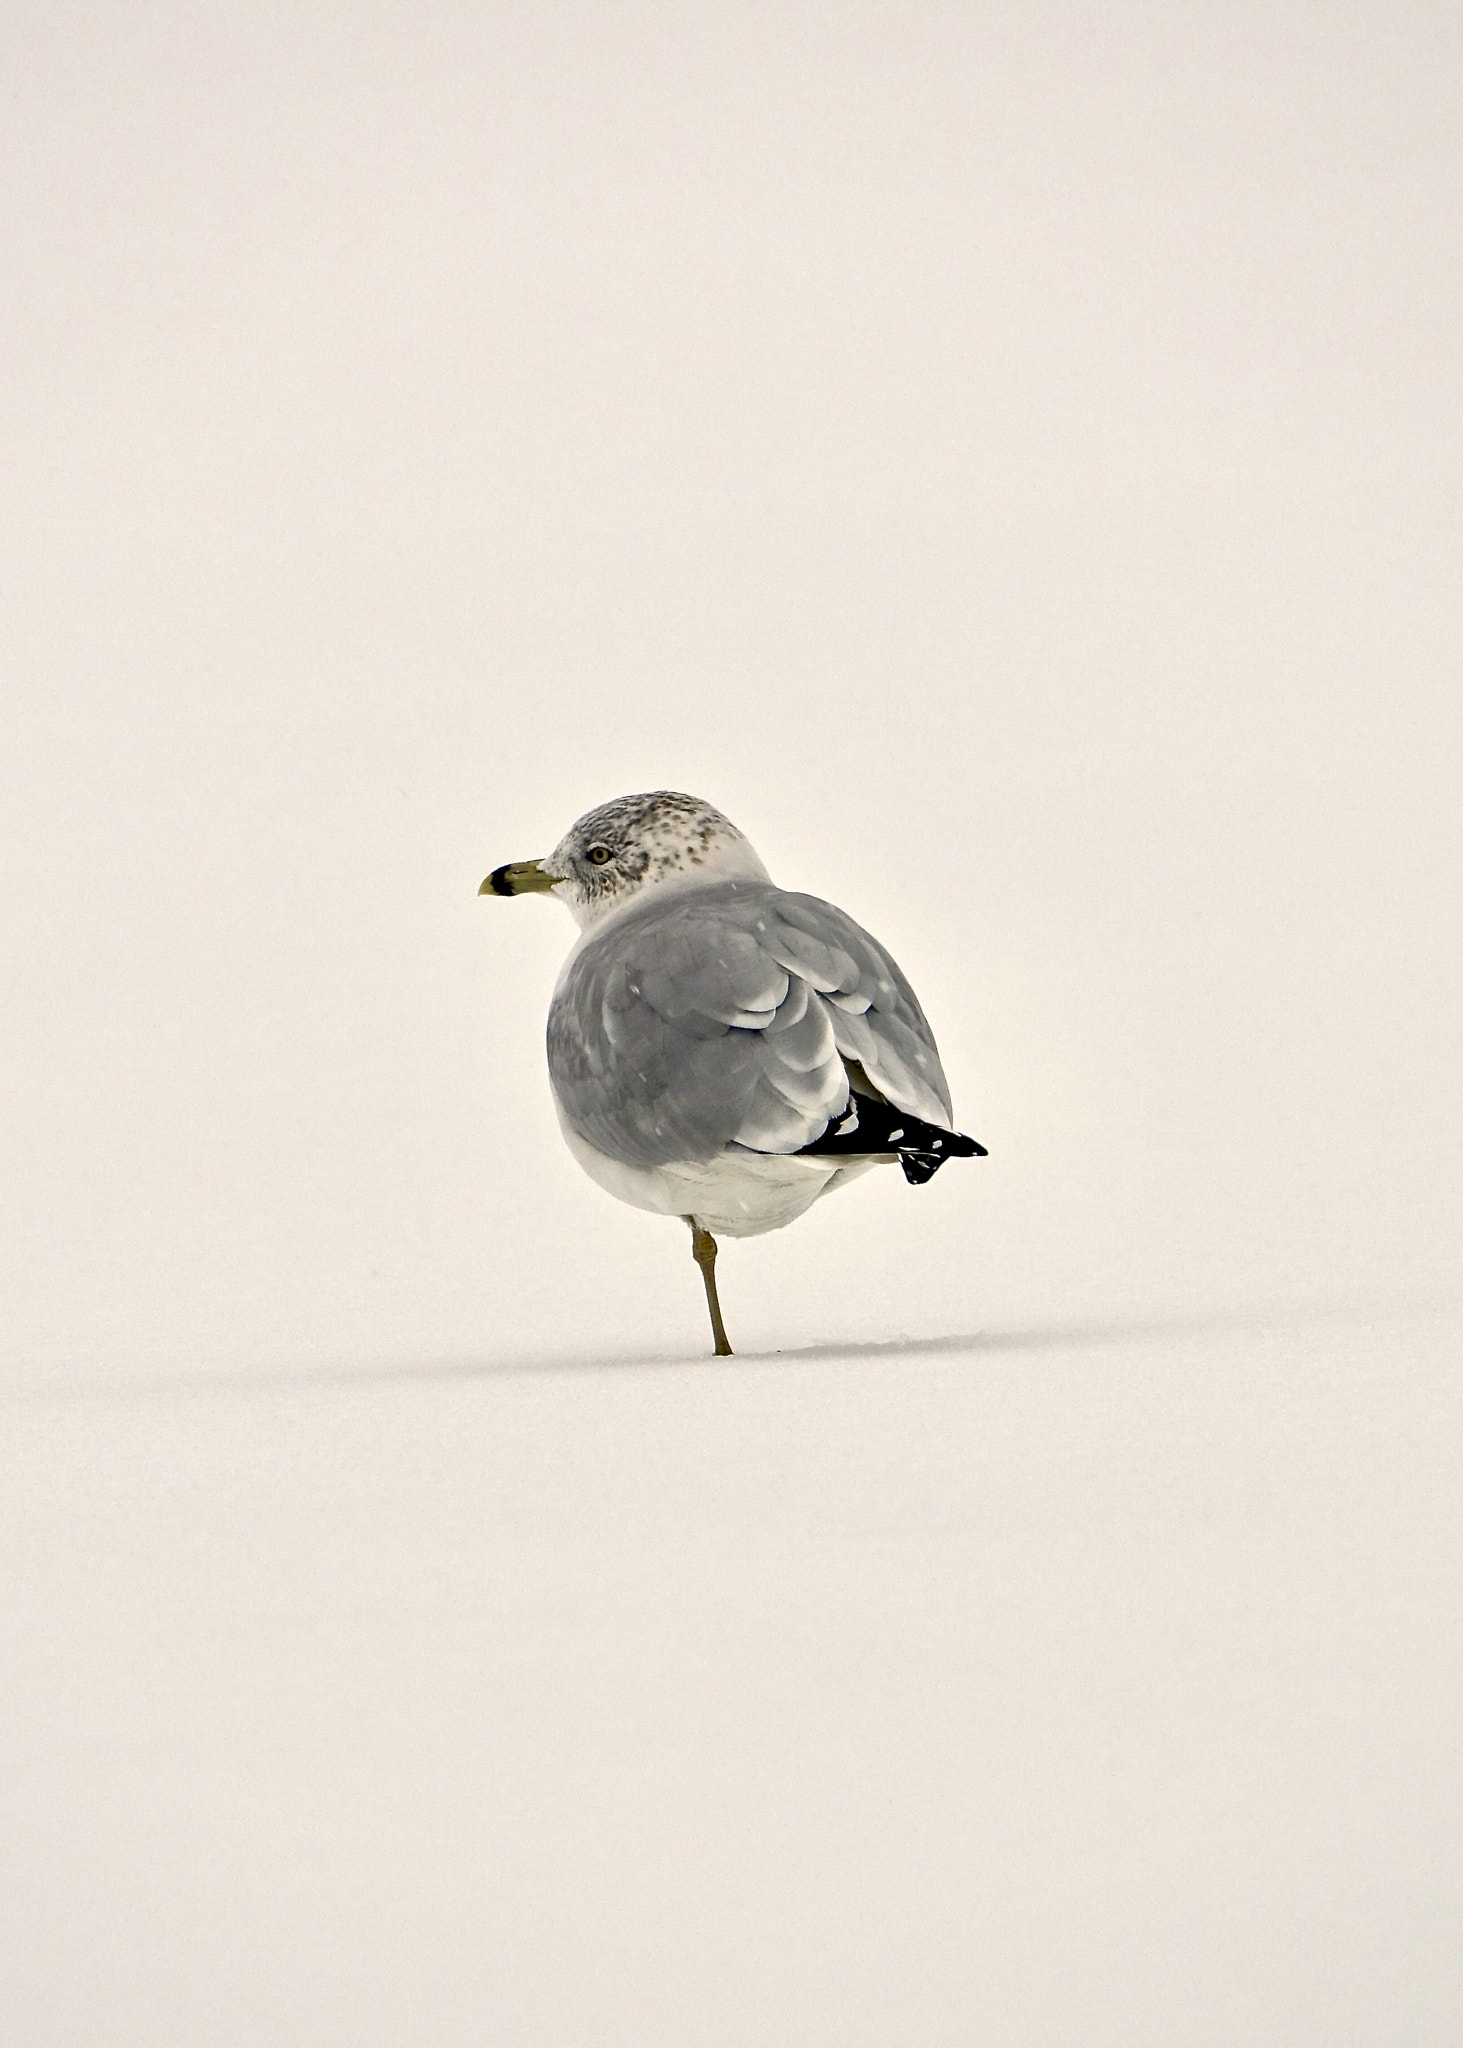 Sony Cyber-shot DSC-RX10 III sample photo. Seagull at snowing photography